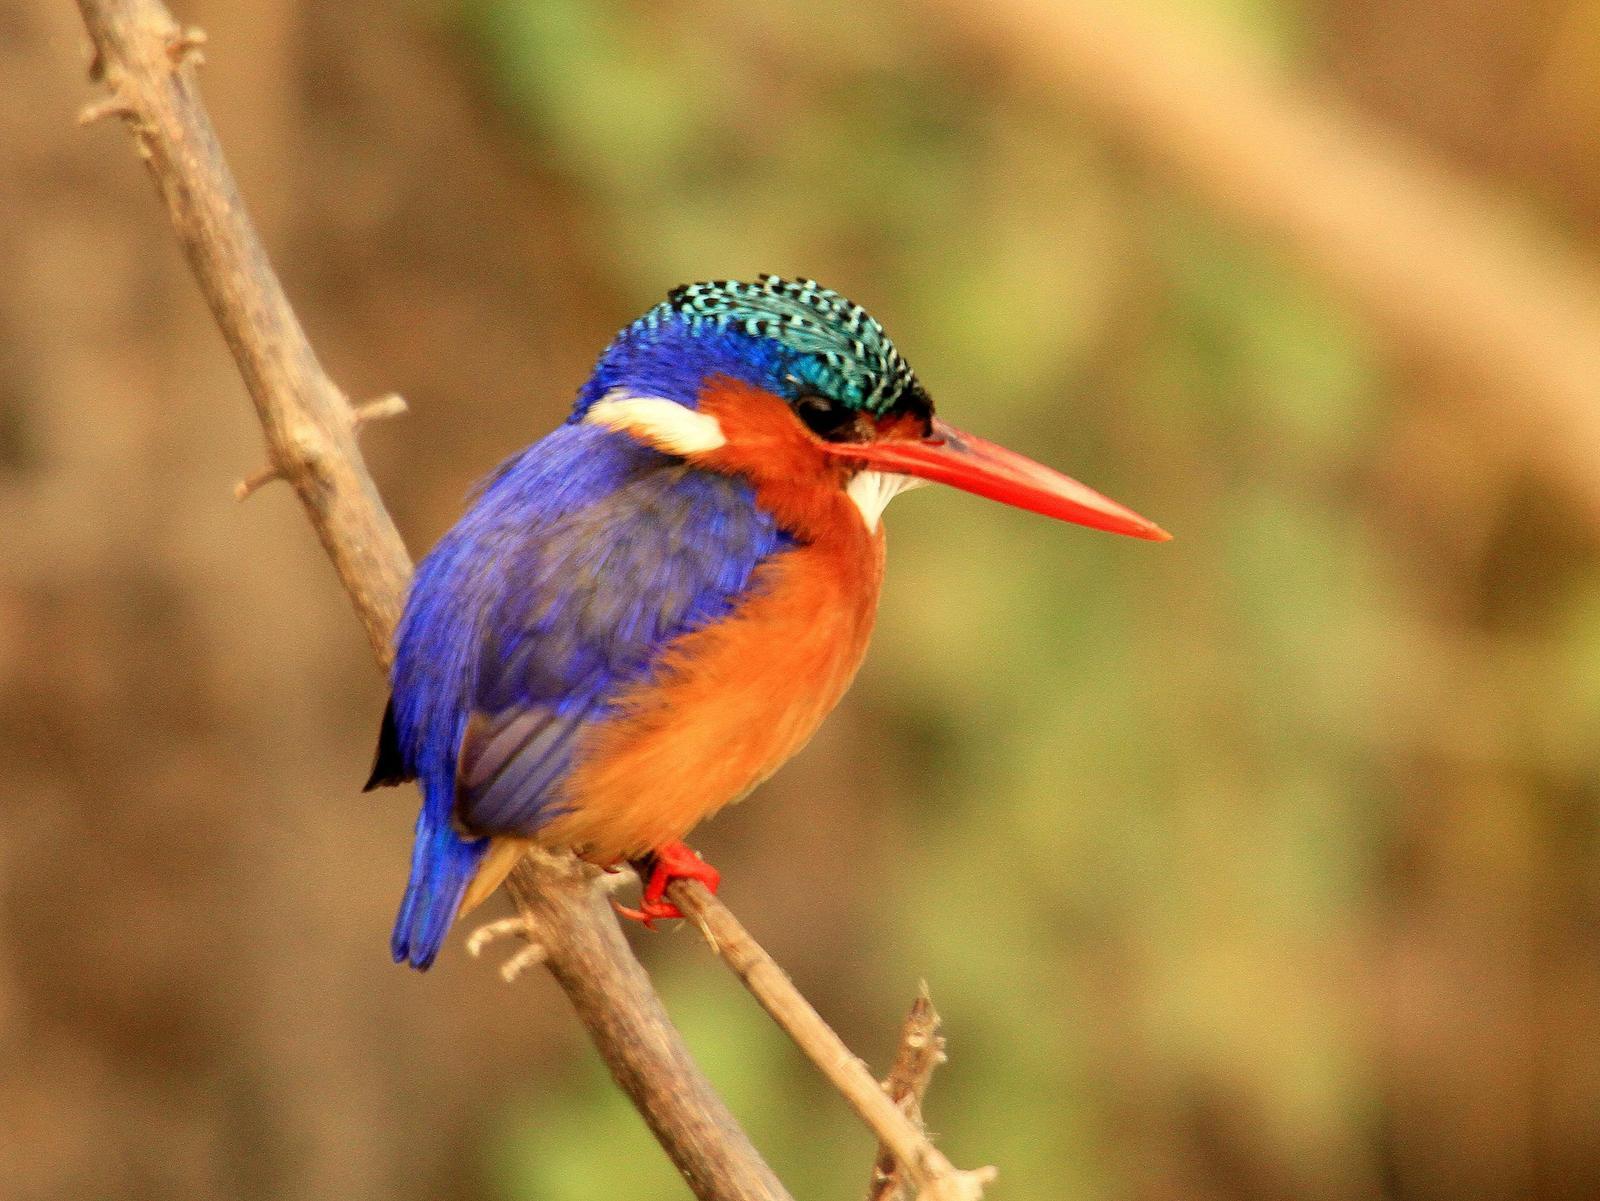 Malachite Kingfisher Photo by Don Downer